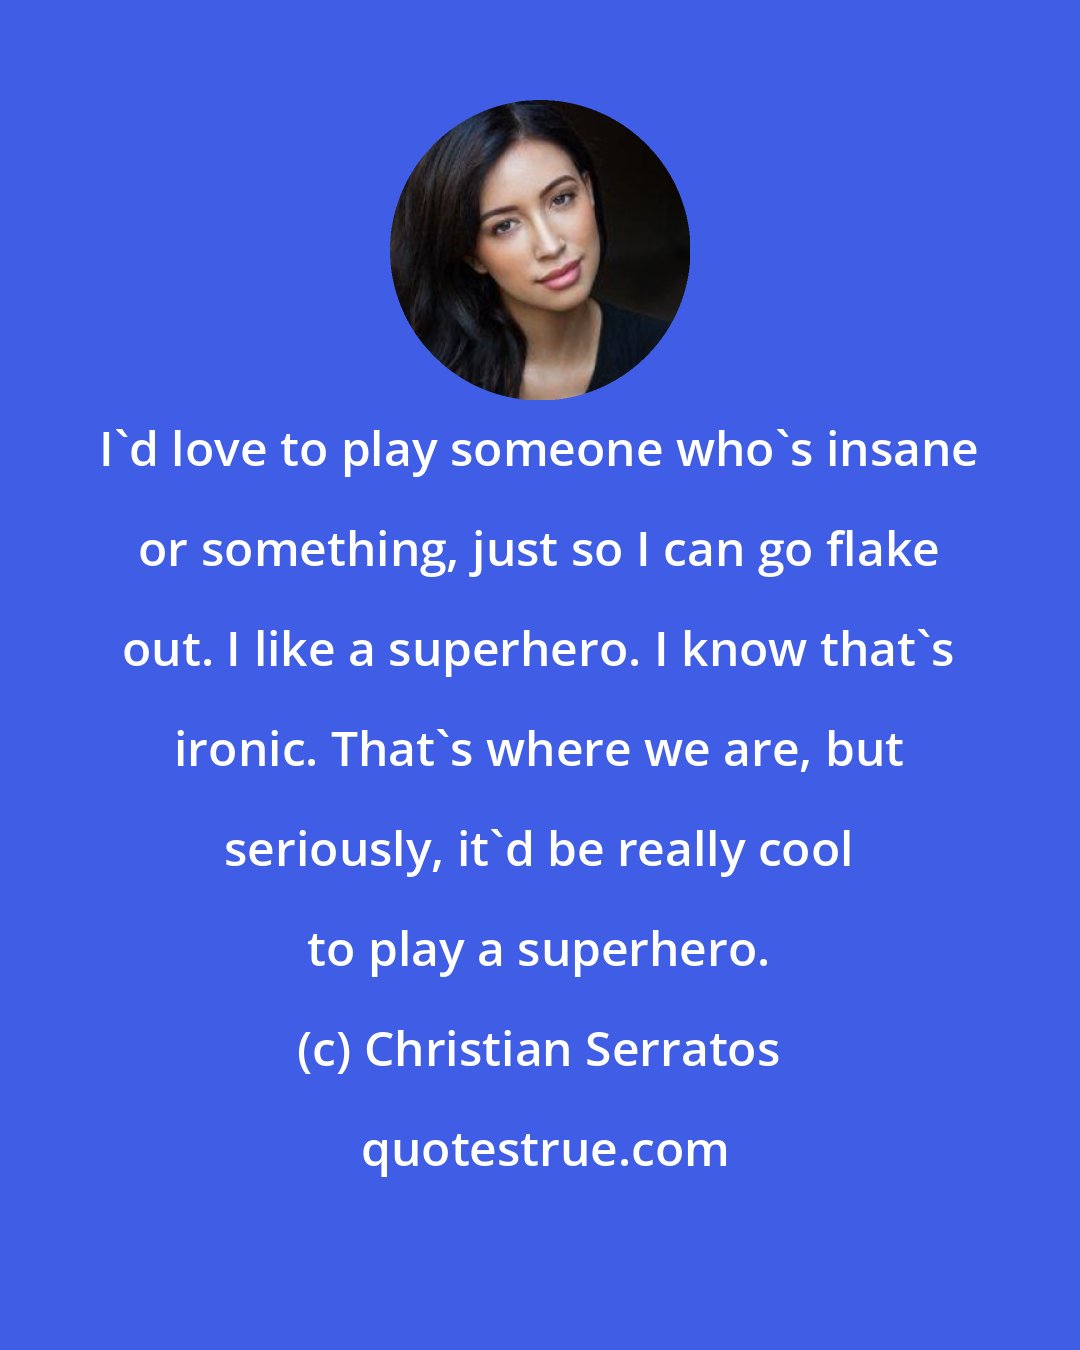 Christian Serratos: I'd love to play someone who's insane or something, just so I can go flake out. I like a superhero. I know that's ironic. That's where we are, but seriously, it'd be really cool to play a superhero.